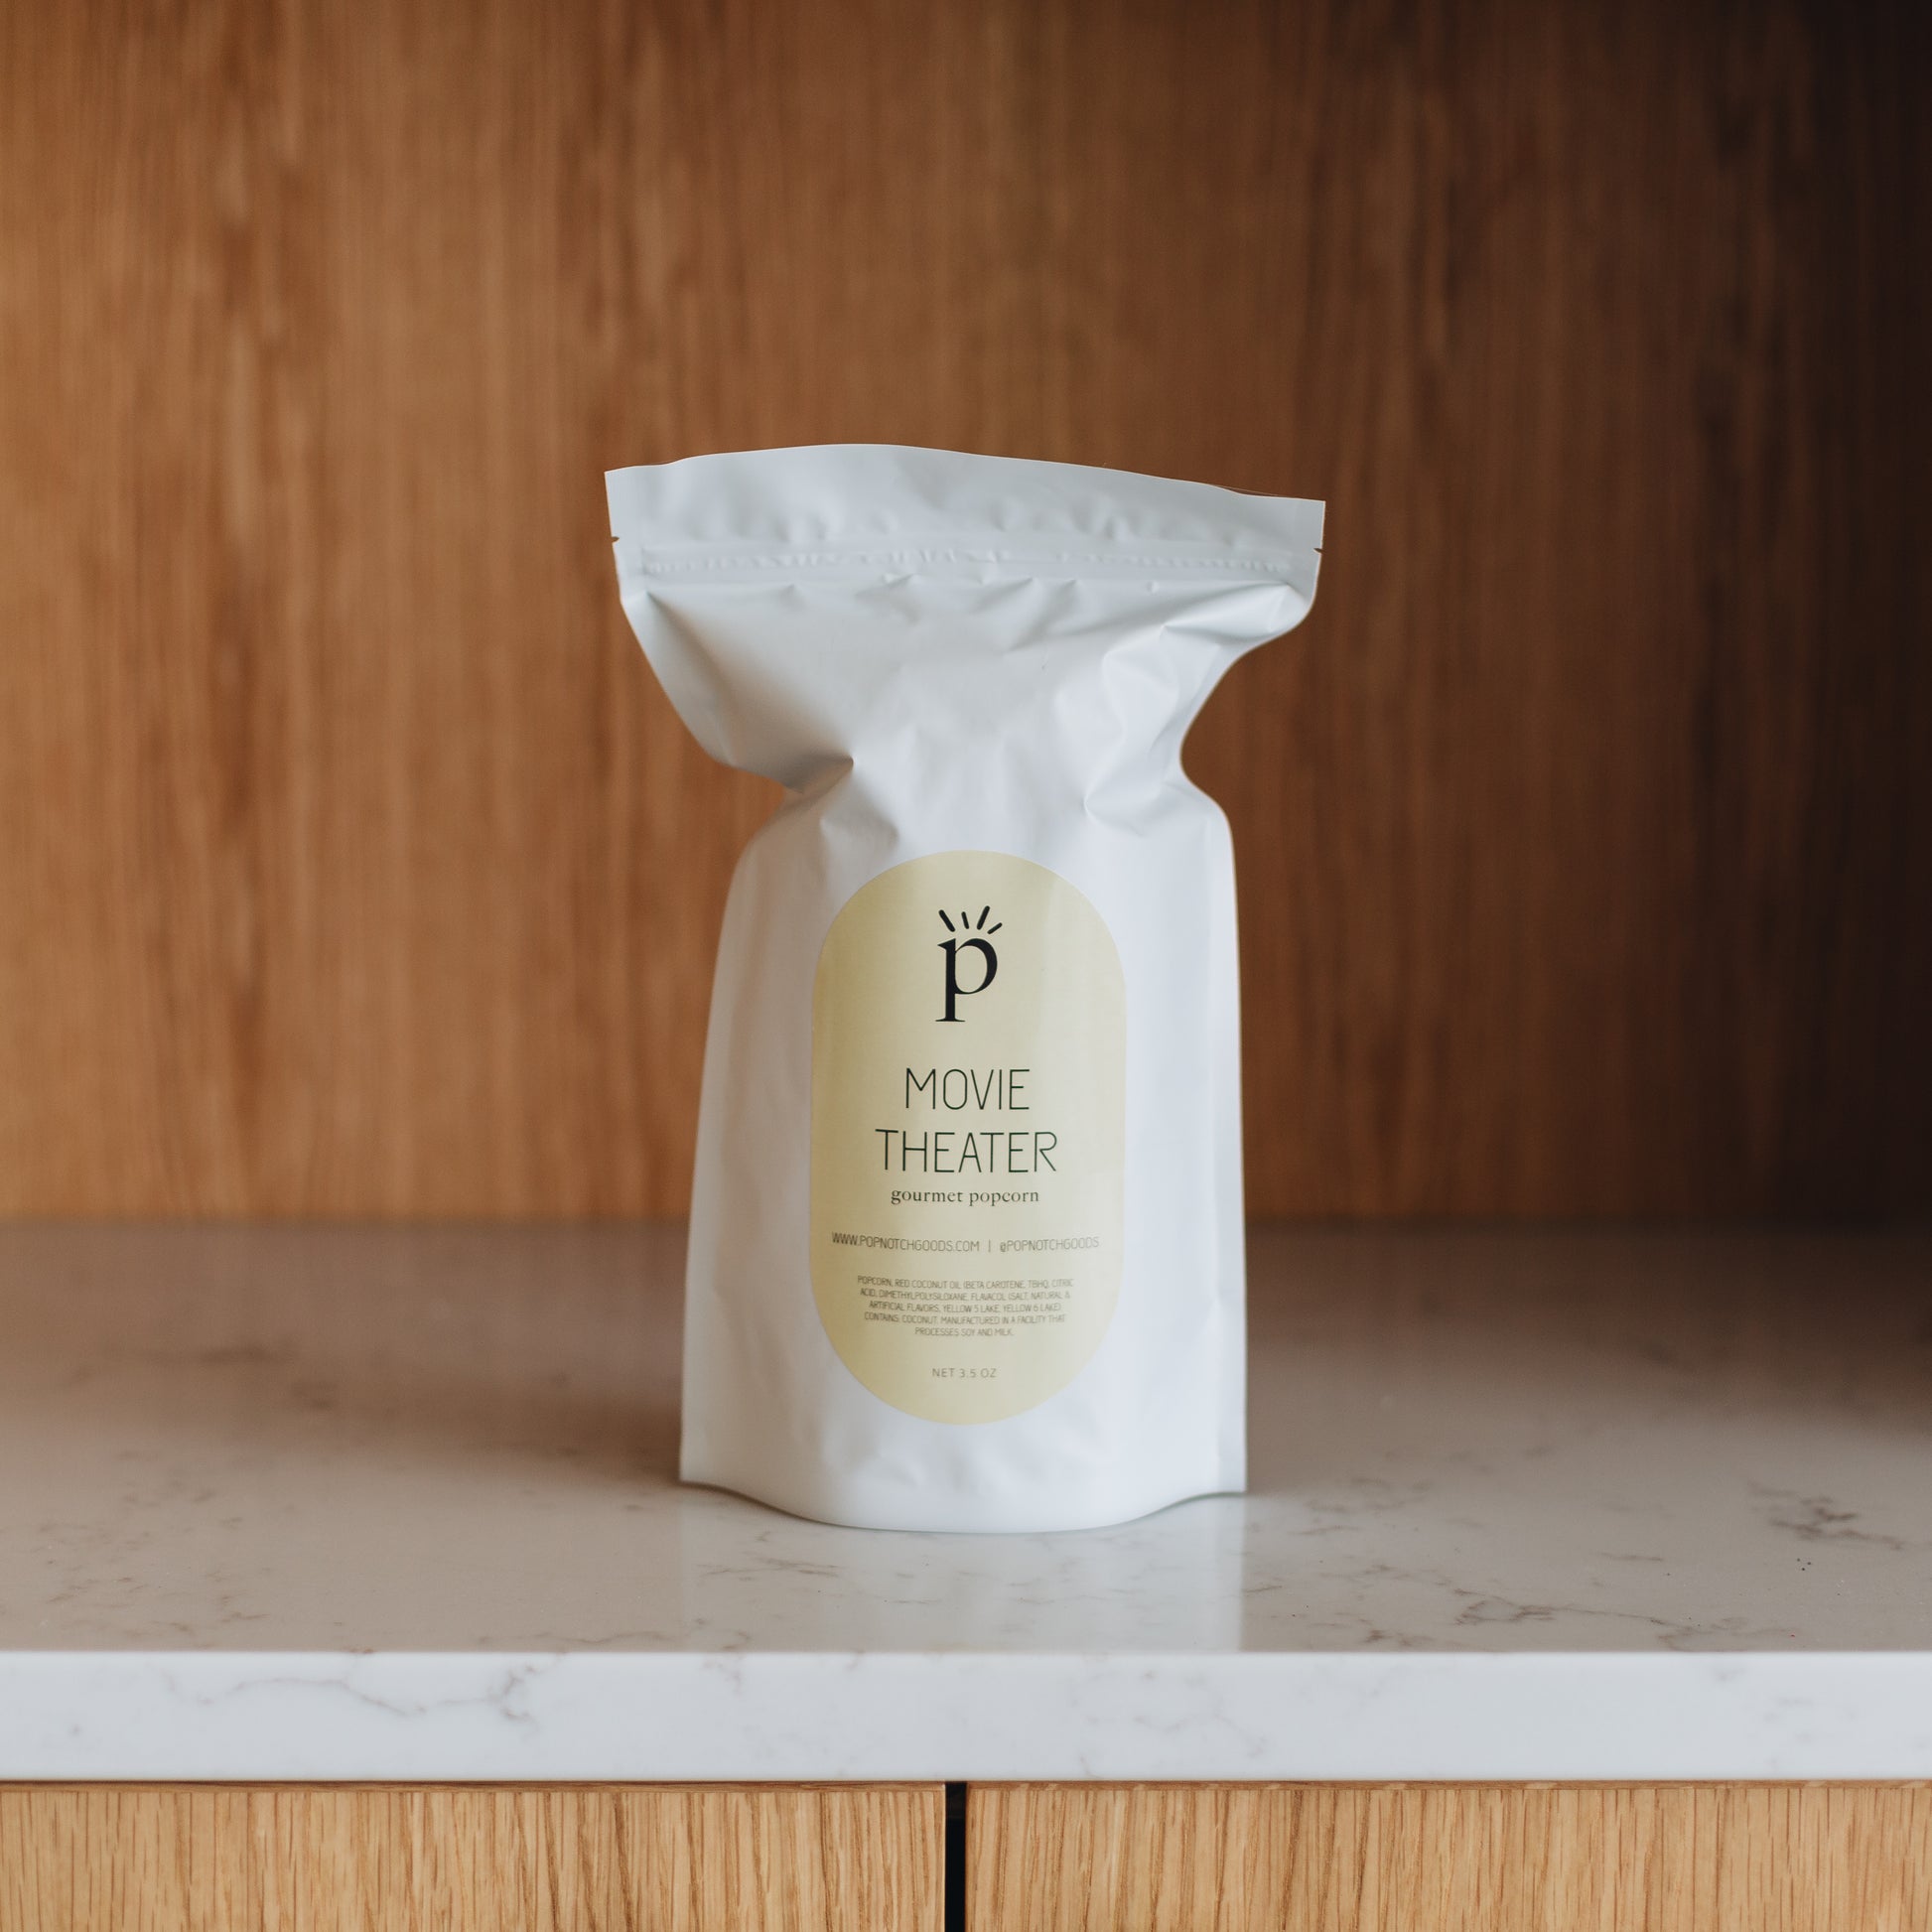 Bring the Movie Theater home with you. Popnotch Goods Movie Theater popcorn is the perfect combo of salt and butter. This is an everyday snack to keep in the house. Order online now or pick up a bag at Popnotch Goods! Featured is our Large Bag (3.5oz)